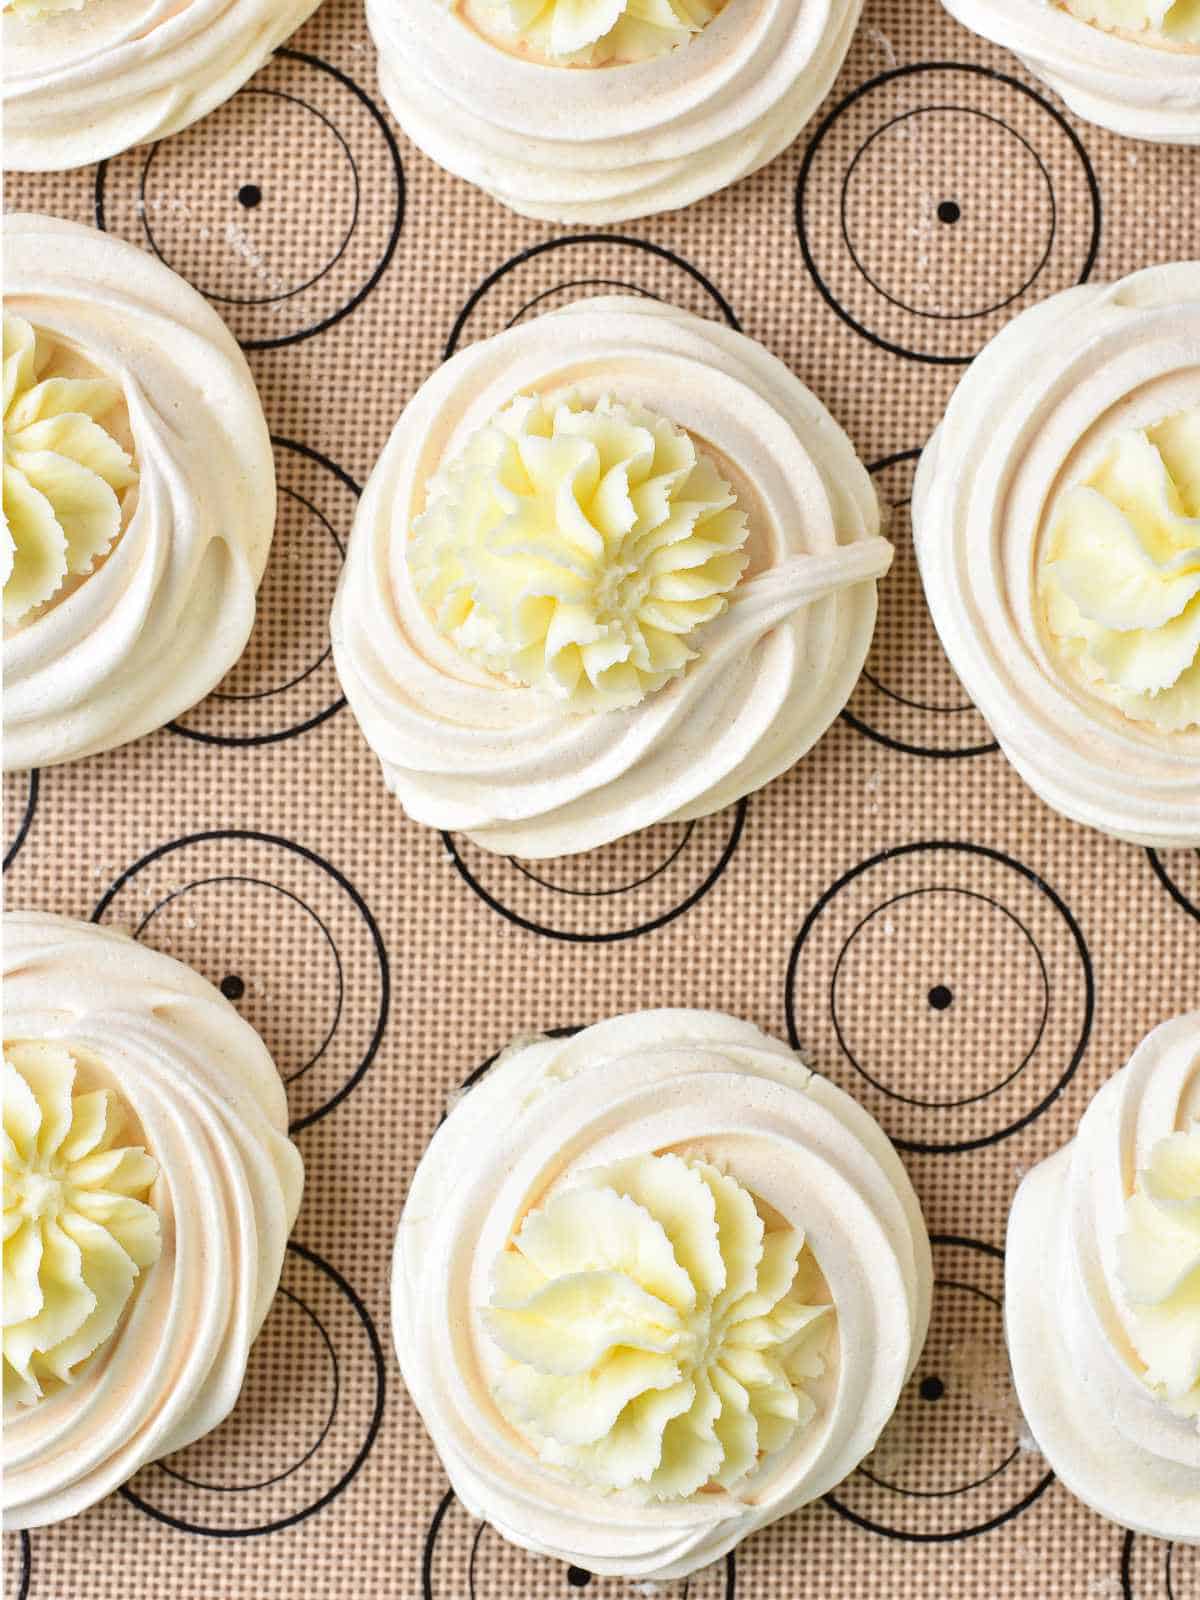 Baked meringues filled with whipped filling.